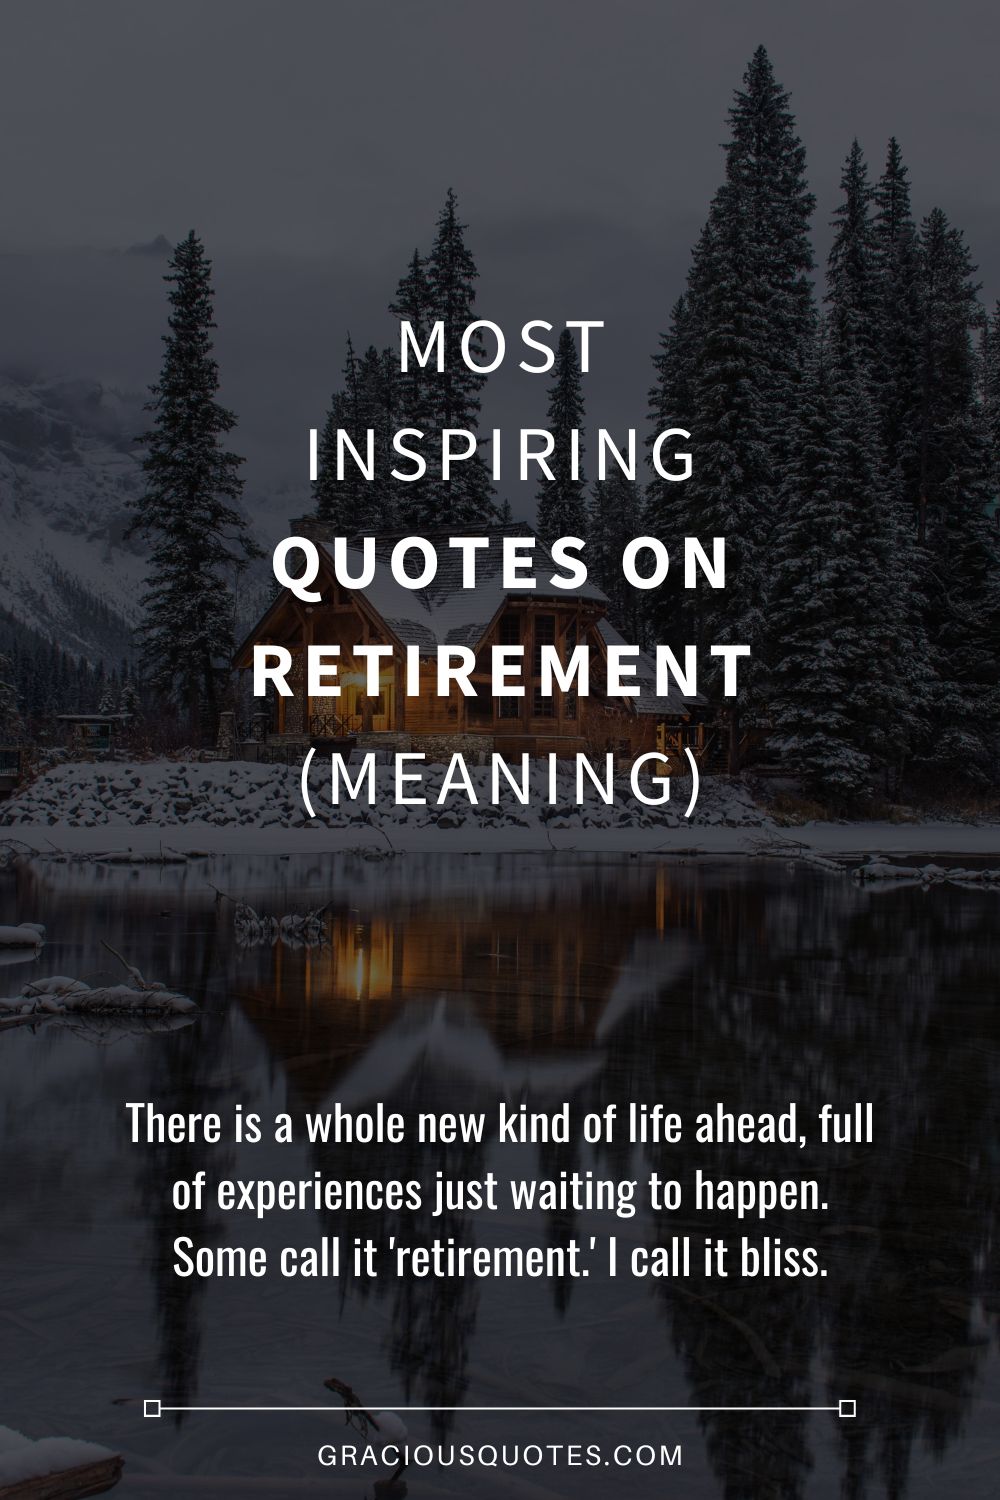 Most Inspiring Quotes on Retirement (MEANING) - Gracious Quotes